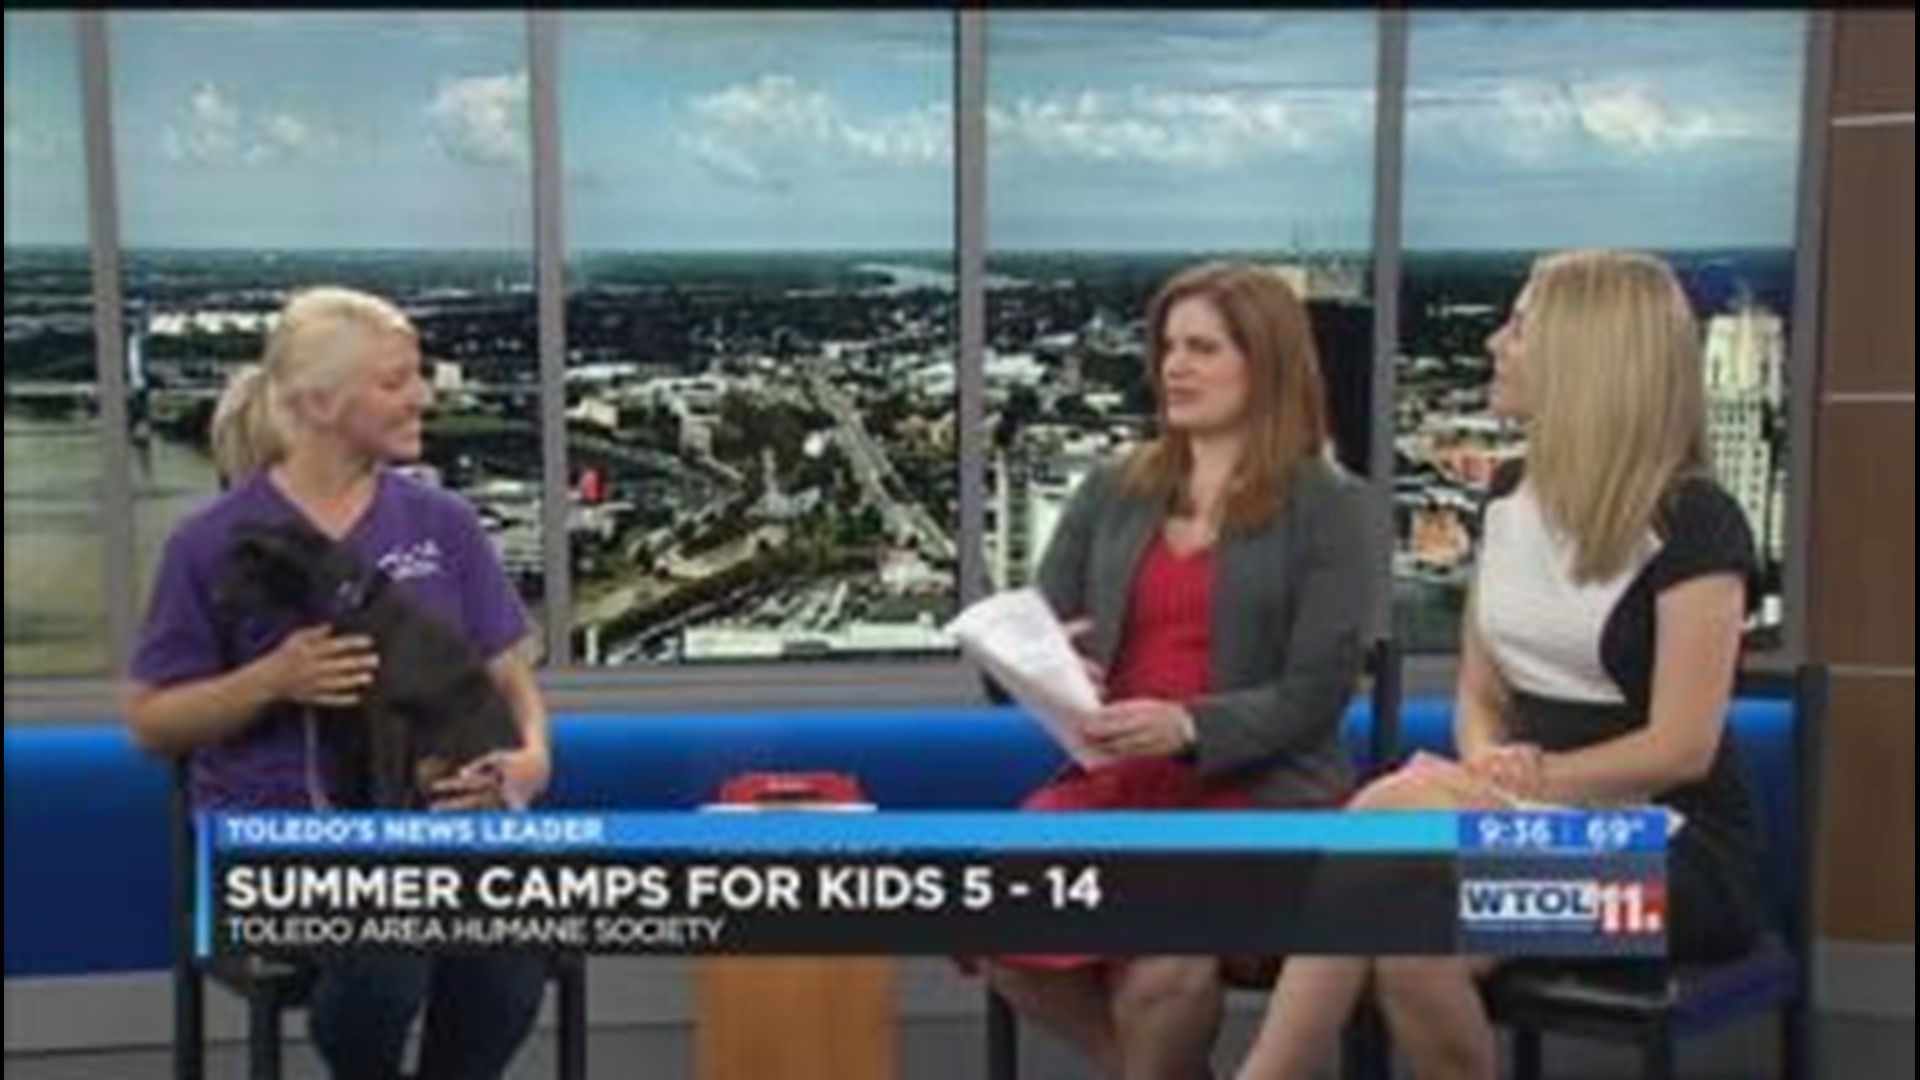 TAHS offers summer camps for youth